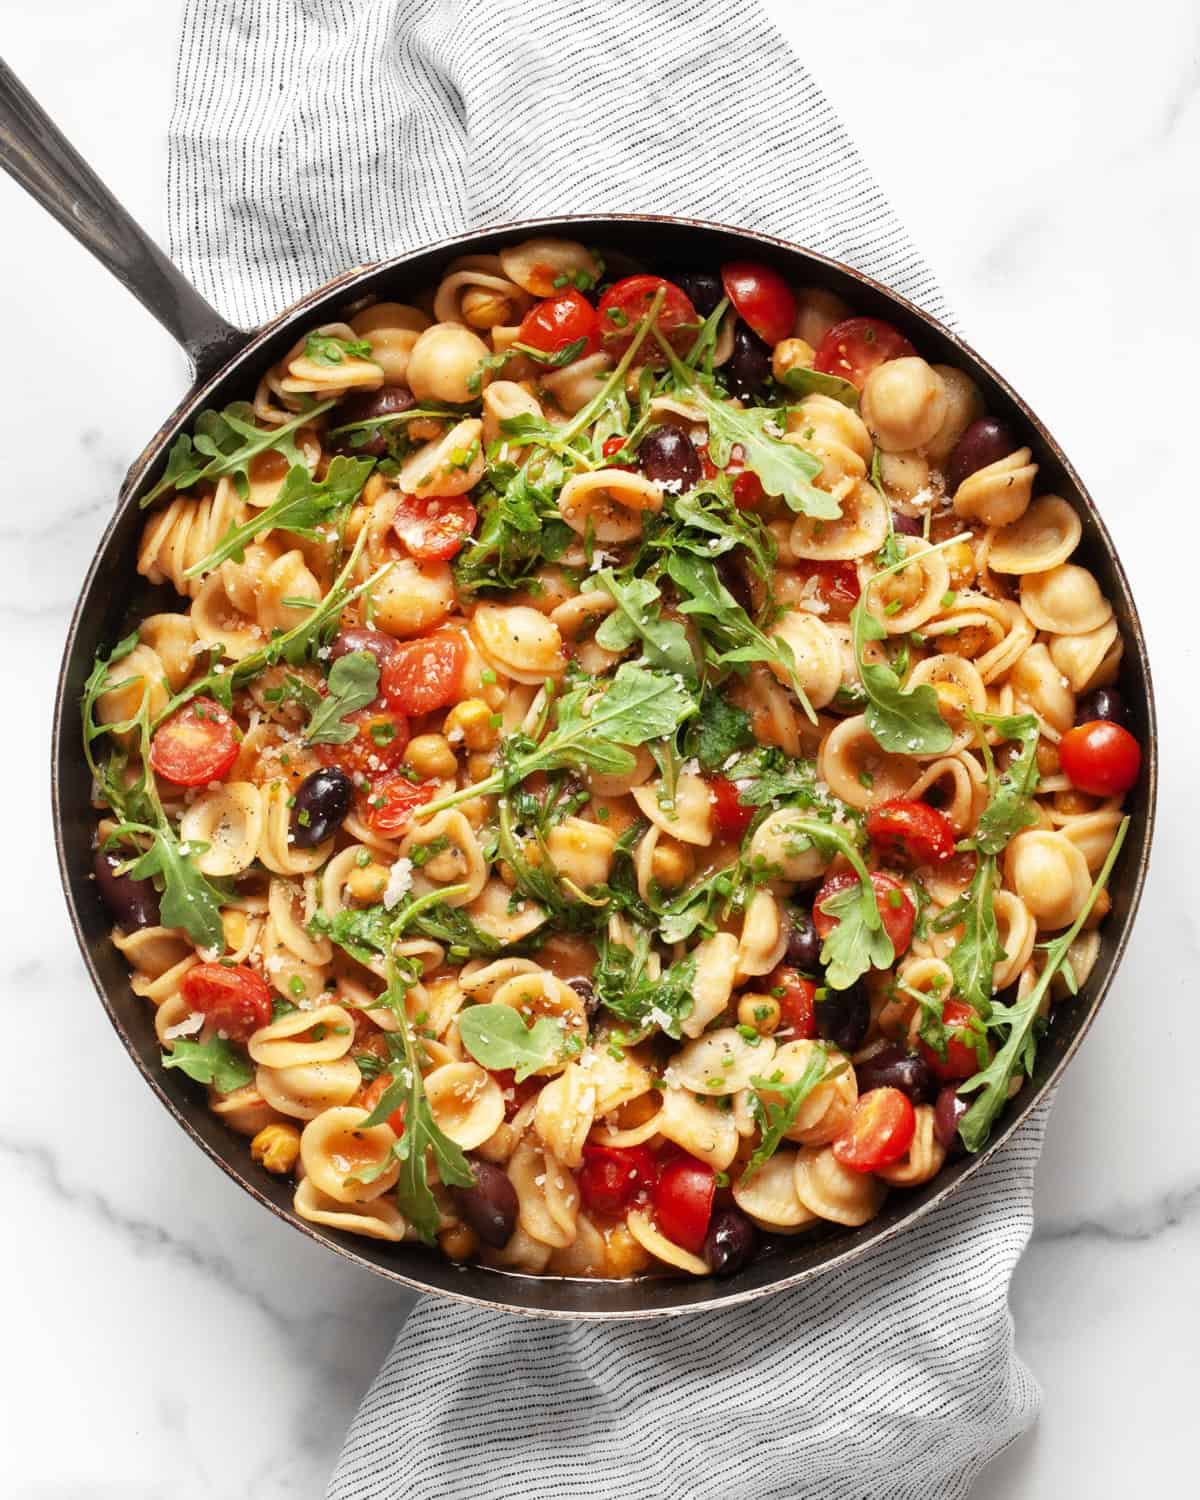 One pan pasta with chickpeas, tomatoes, olives and arugula in a skillet.